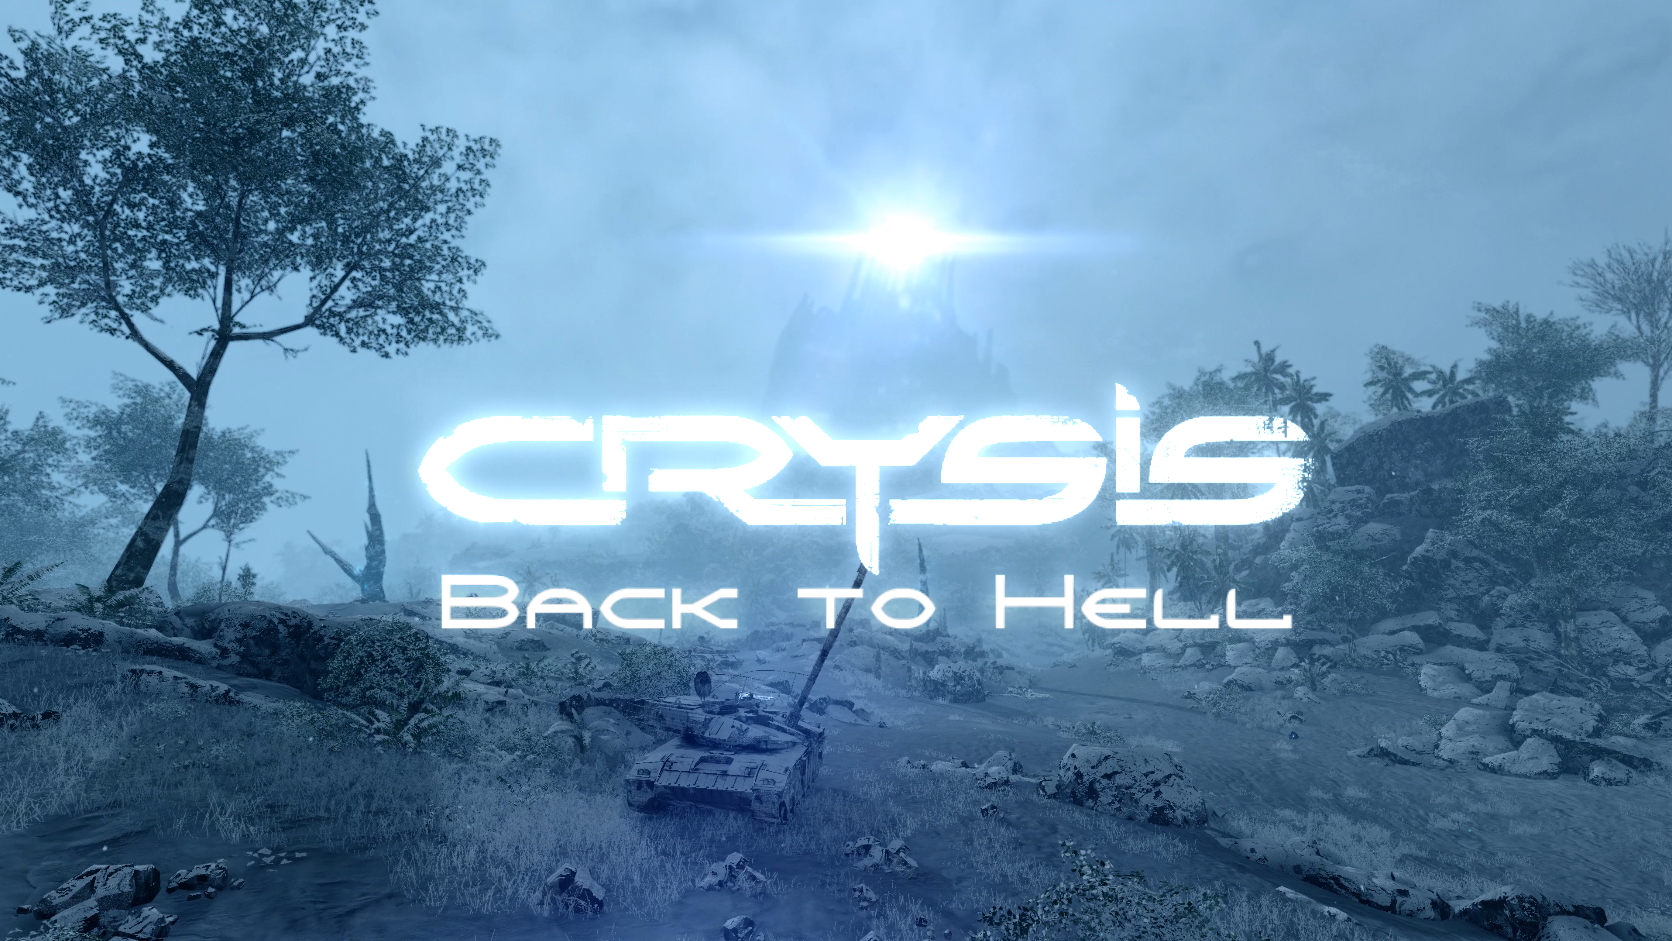 Back to Hell - Episode 1 Release news